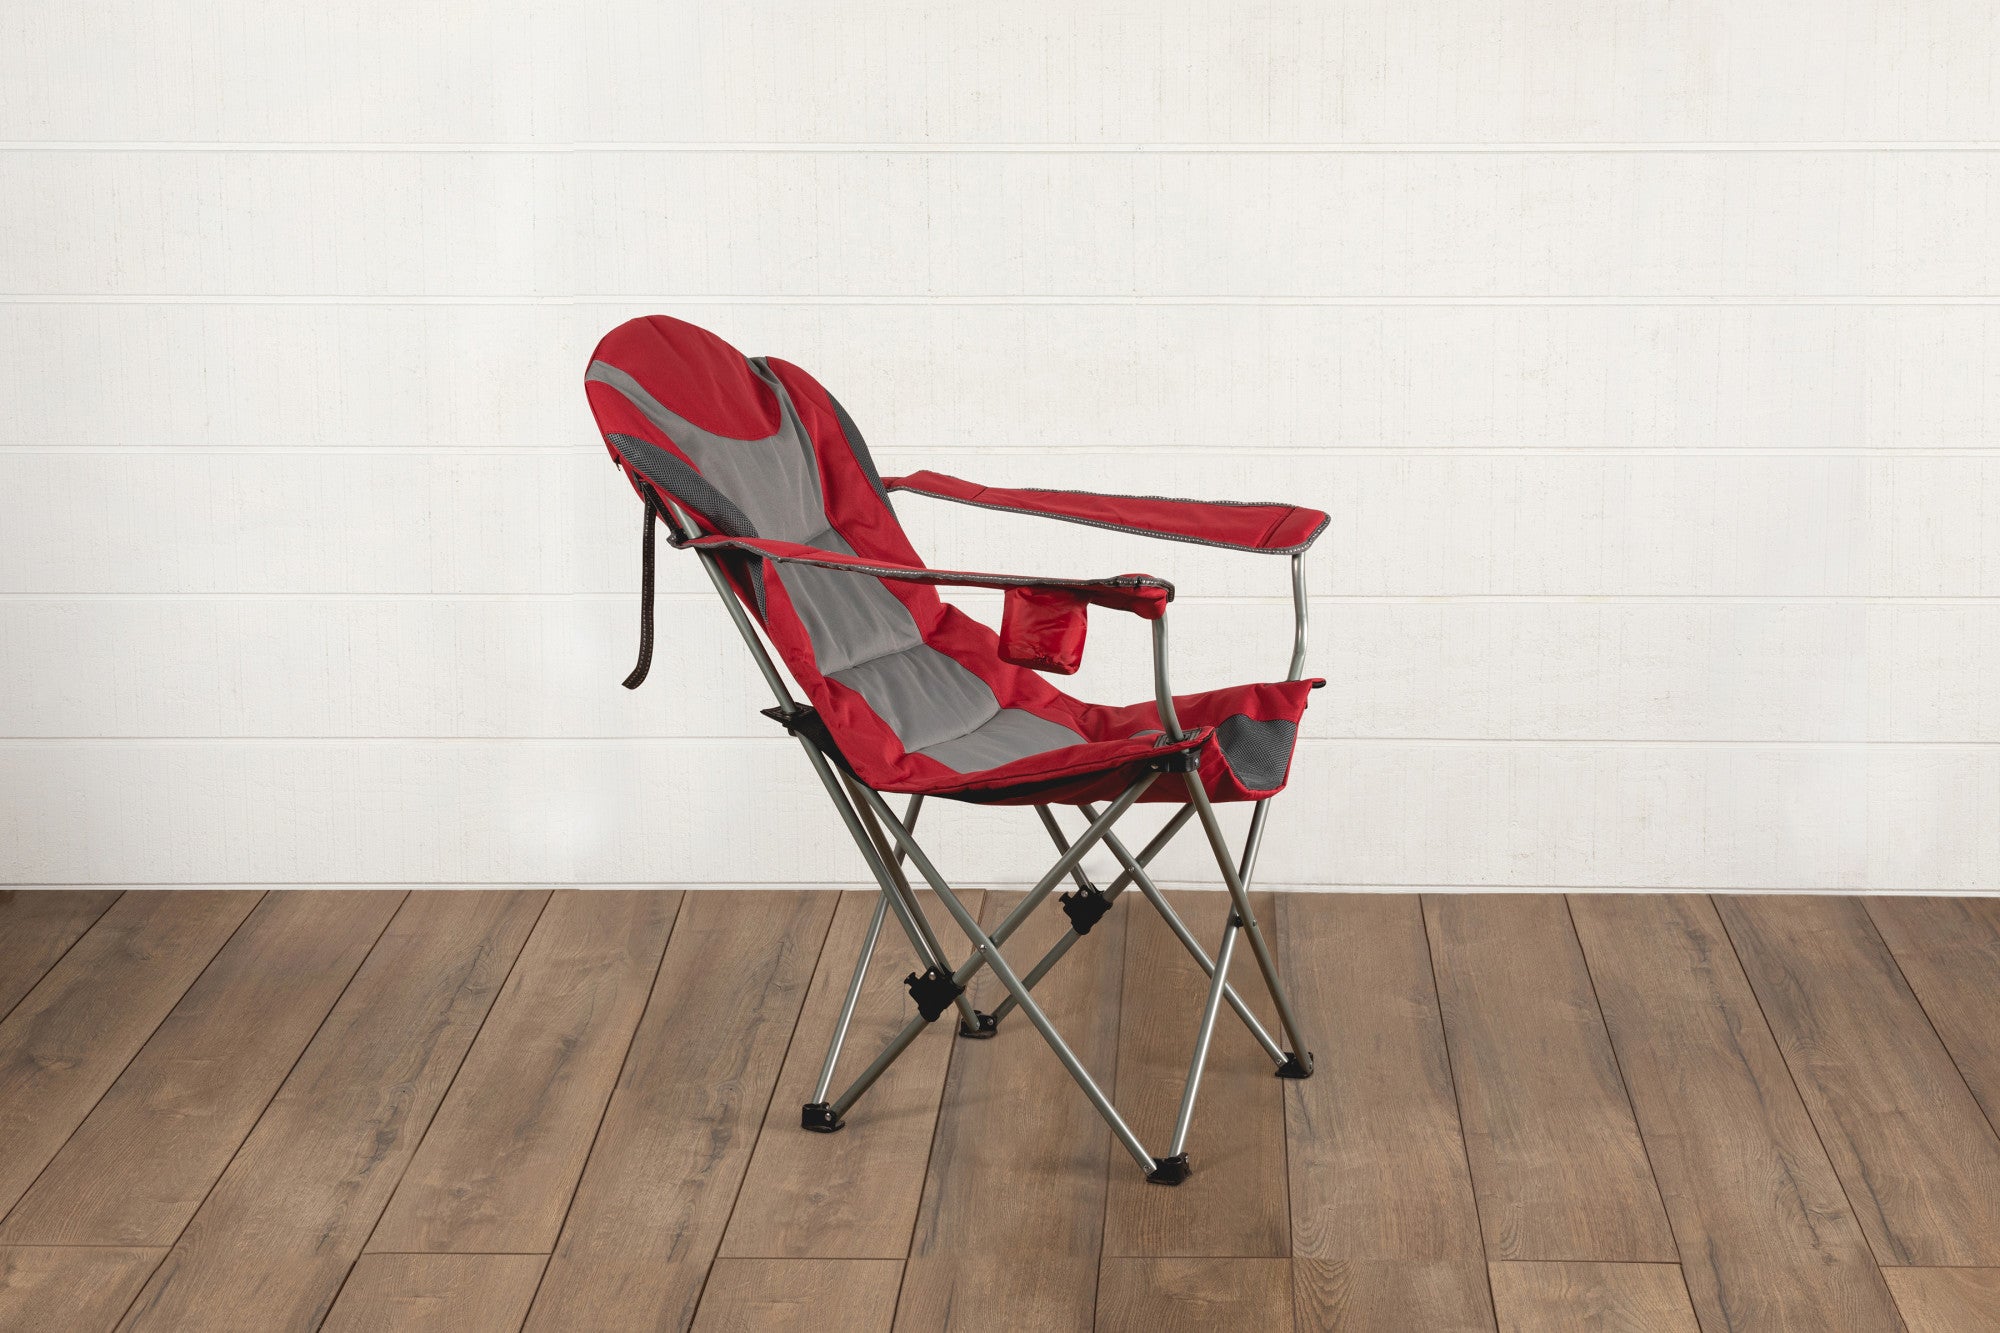 Tampa Bay Buccaneers - Reclining Camp Chair